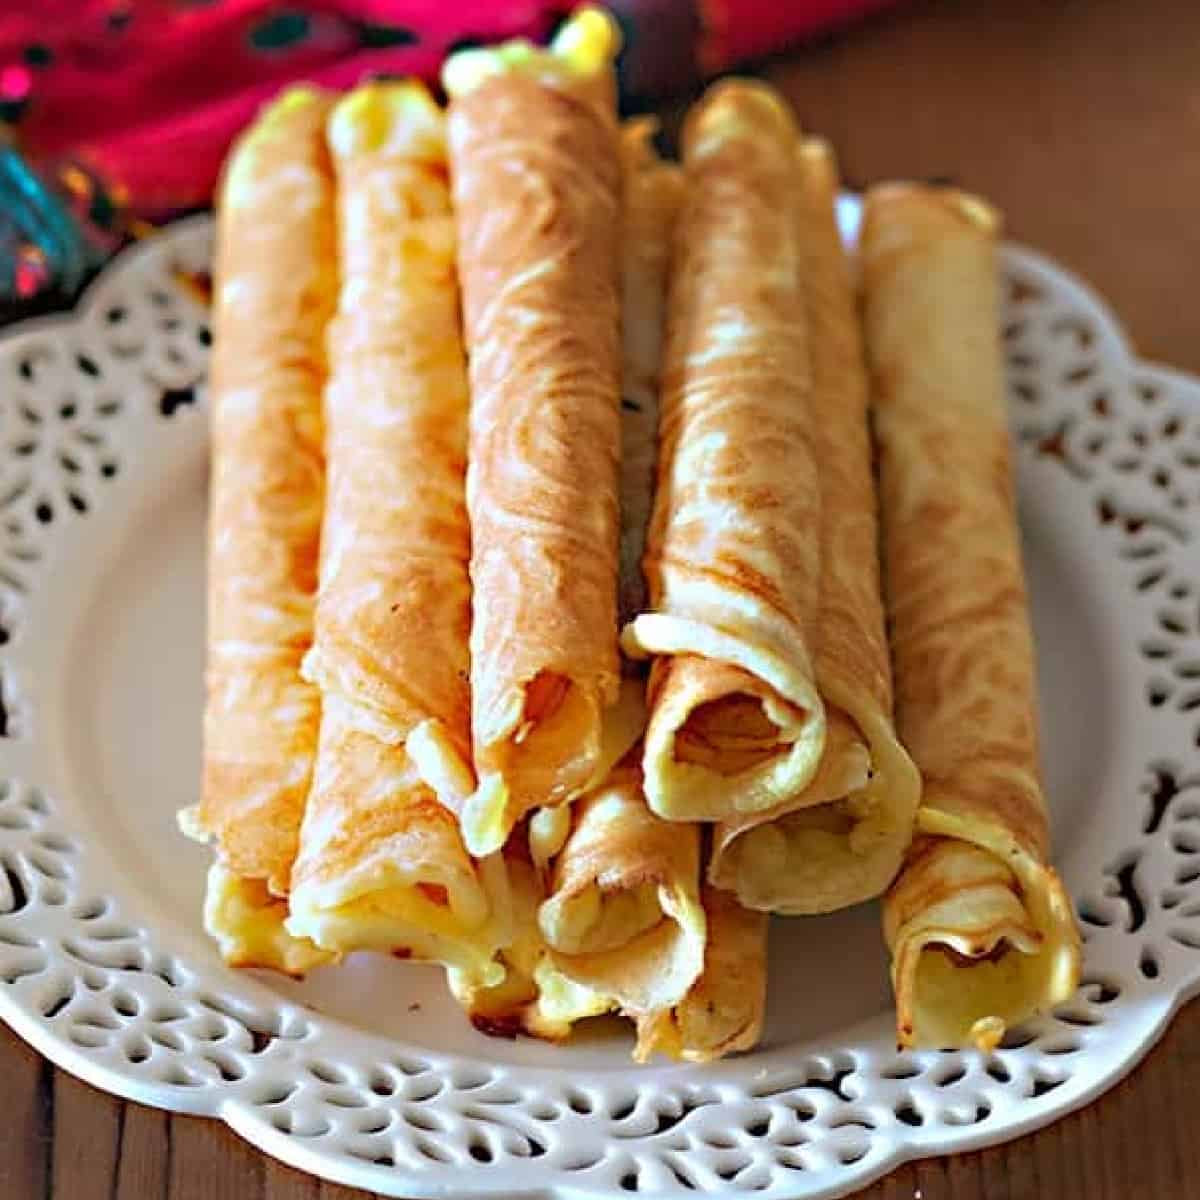 Krumkake is a delicate Norwegian cookie that is made through generations. It's decadent, delicious and worth every minute spent making it!
